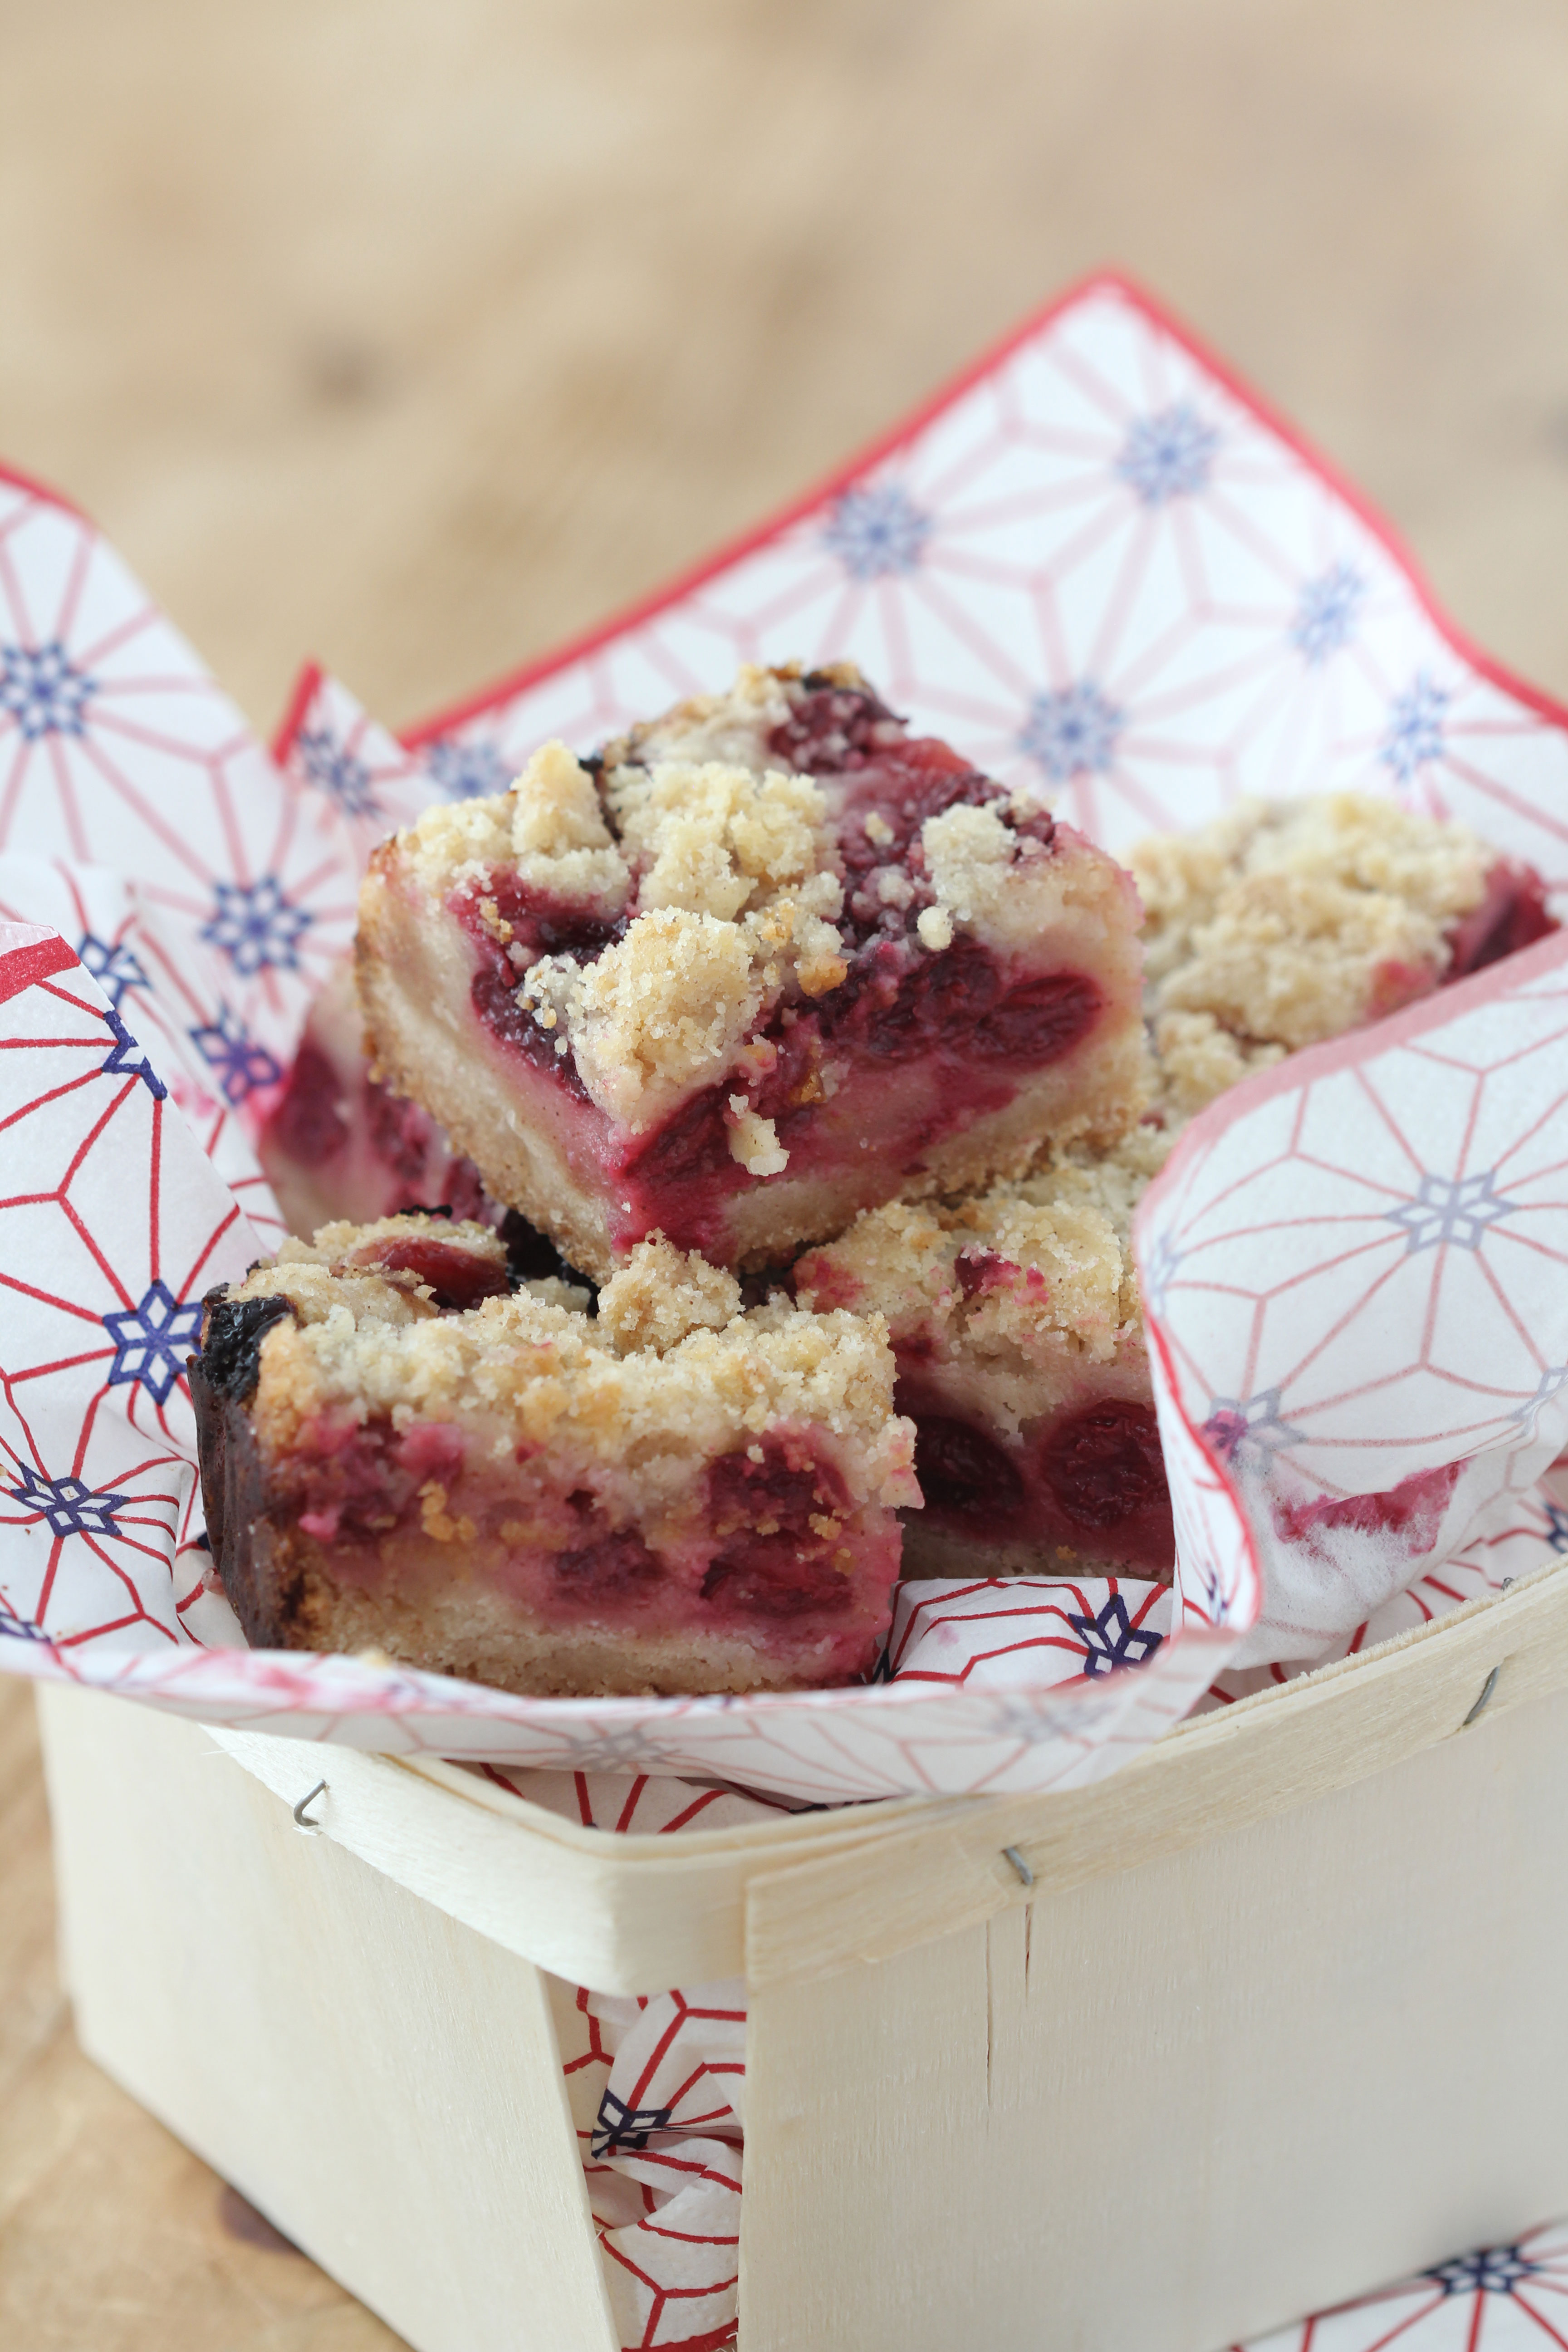 These crumble bars are so good, but even better when Sour Cherries are in season. You will want to make these Sour Cherry Crumble Bars!